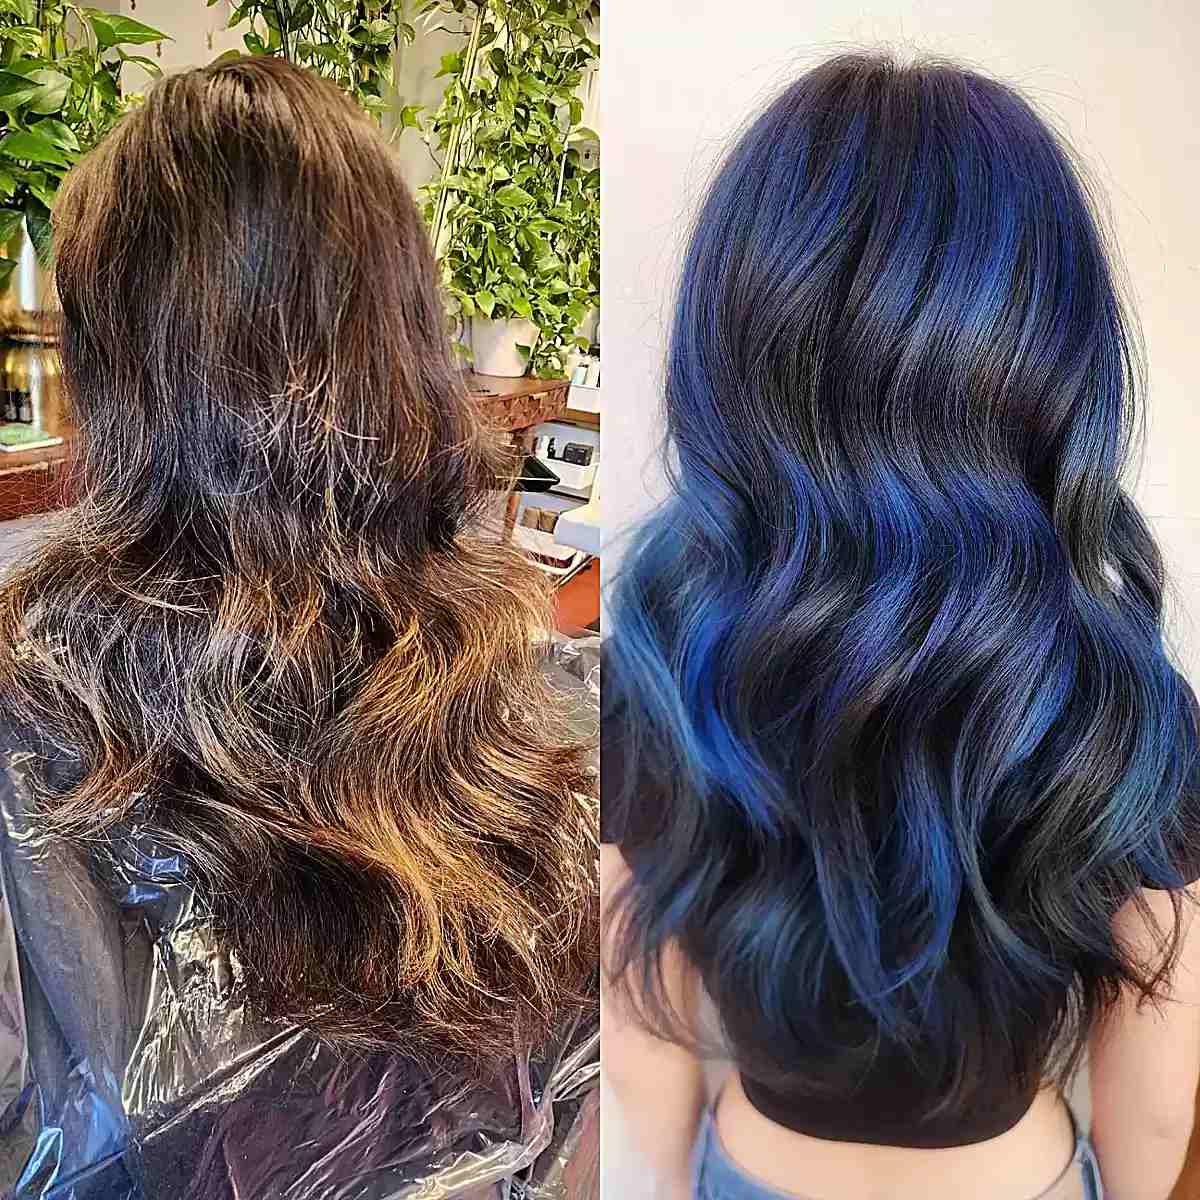 20 Magnetizing Hairstyles with Dark Blue Hair Color | ผมสีน้ำเงินเข้ม,  ผมสีน้ำเงิน, สีผมออมเบร